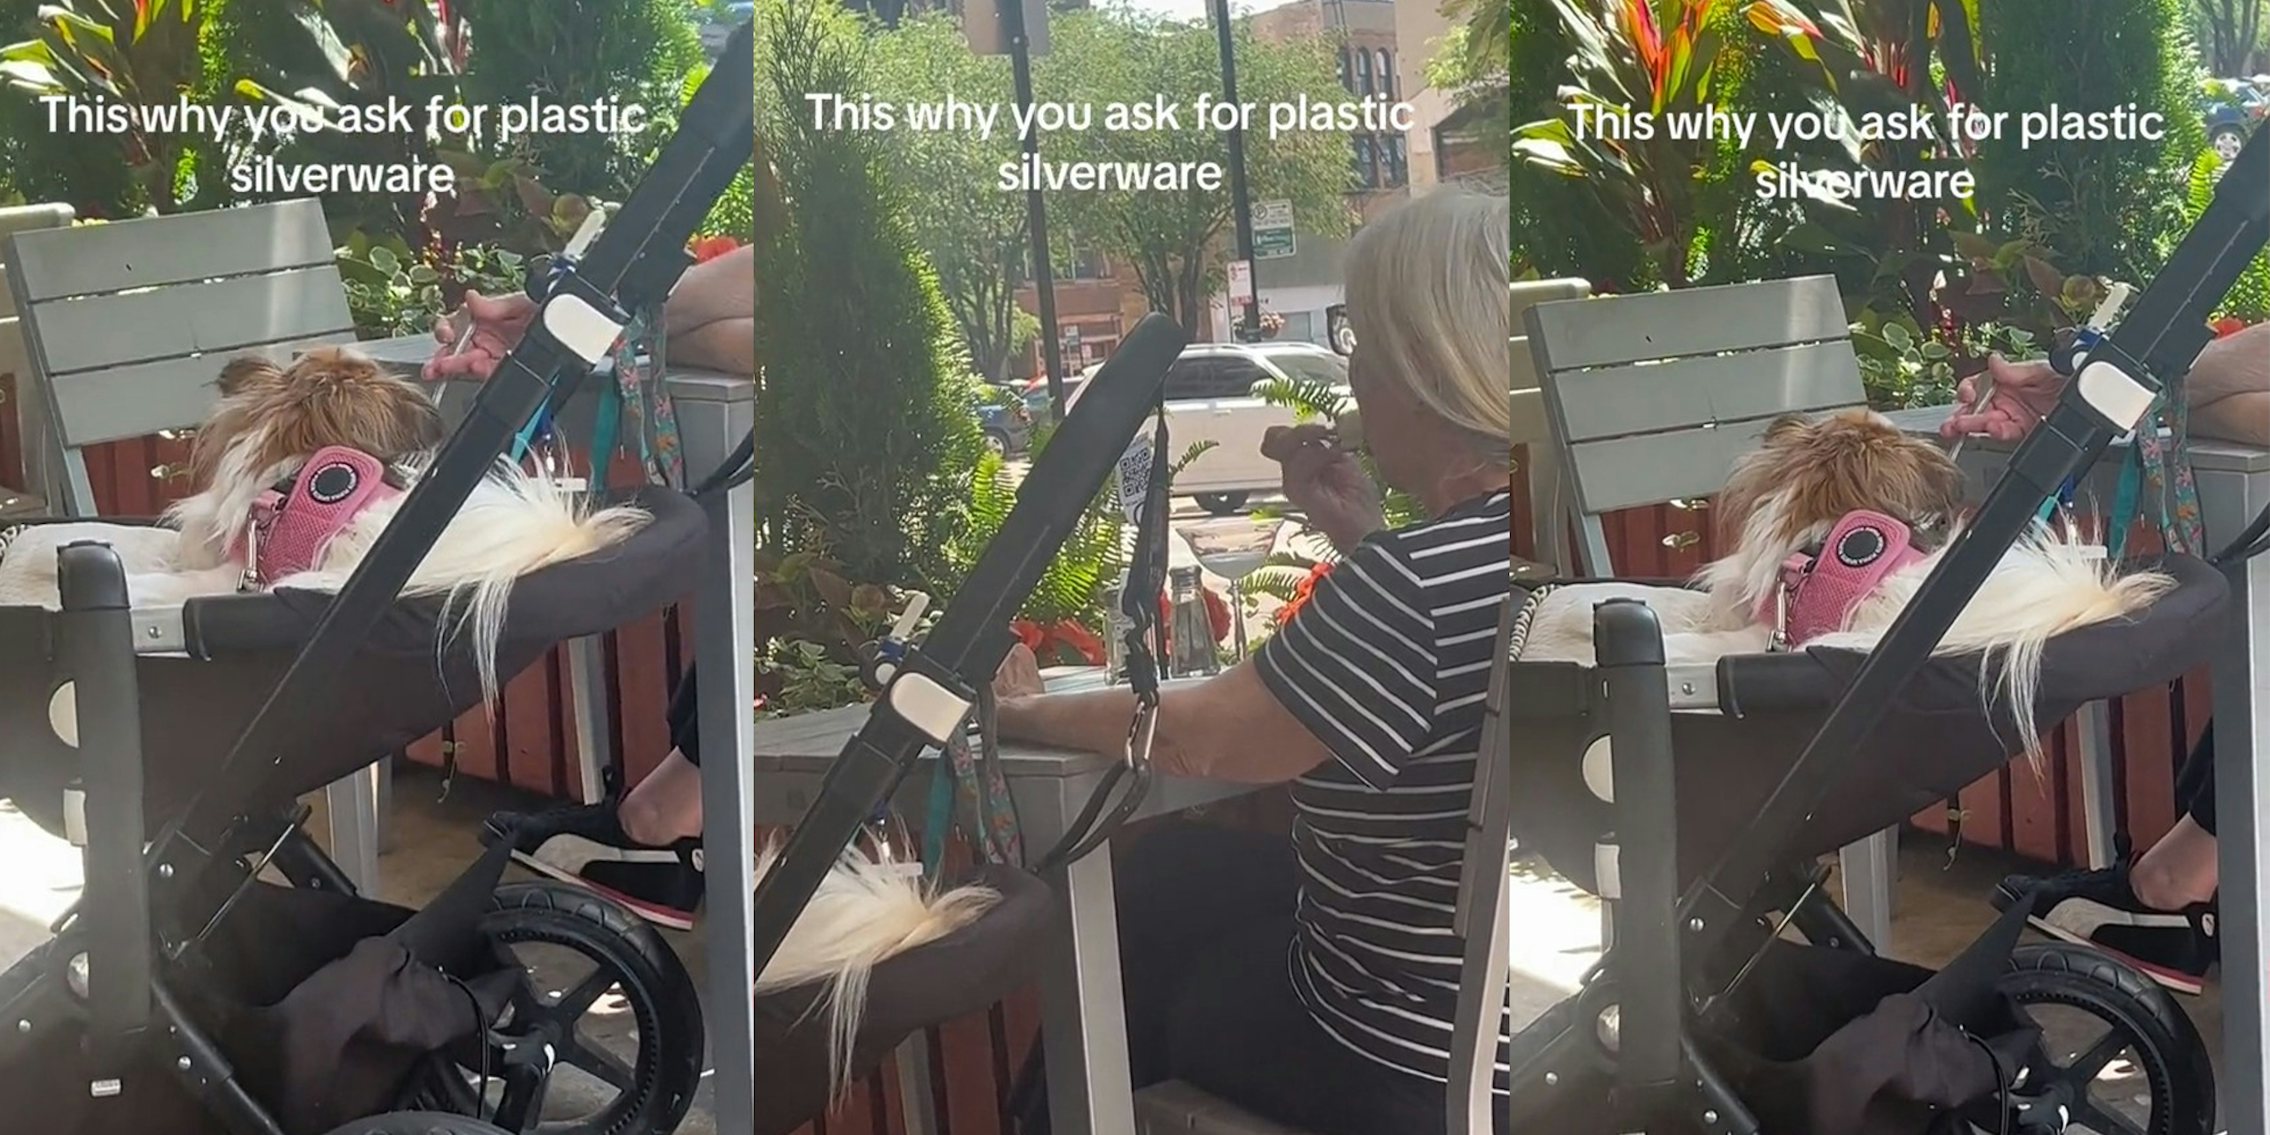 Customer says to always ask for plastic utensils after witnessing woman and her dog sharing same fork at restaurant